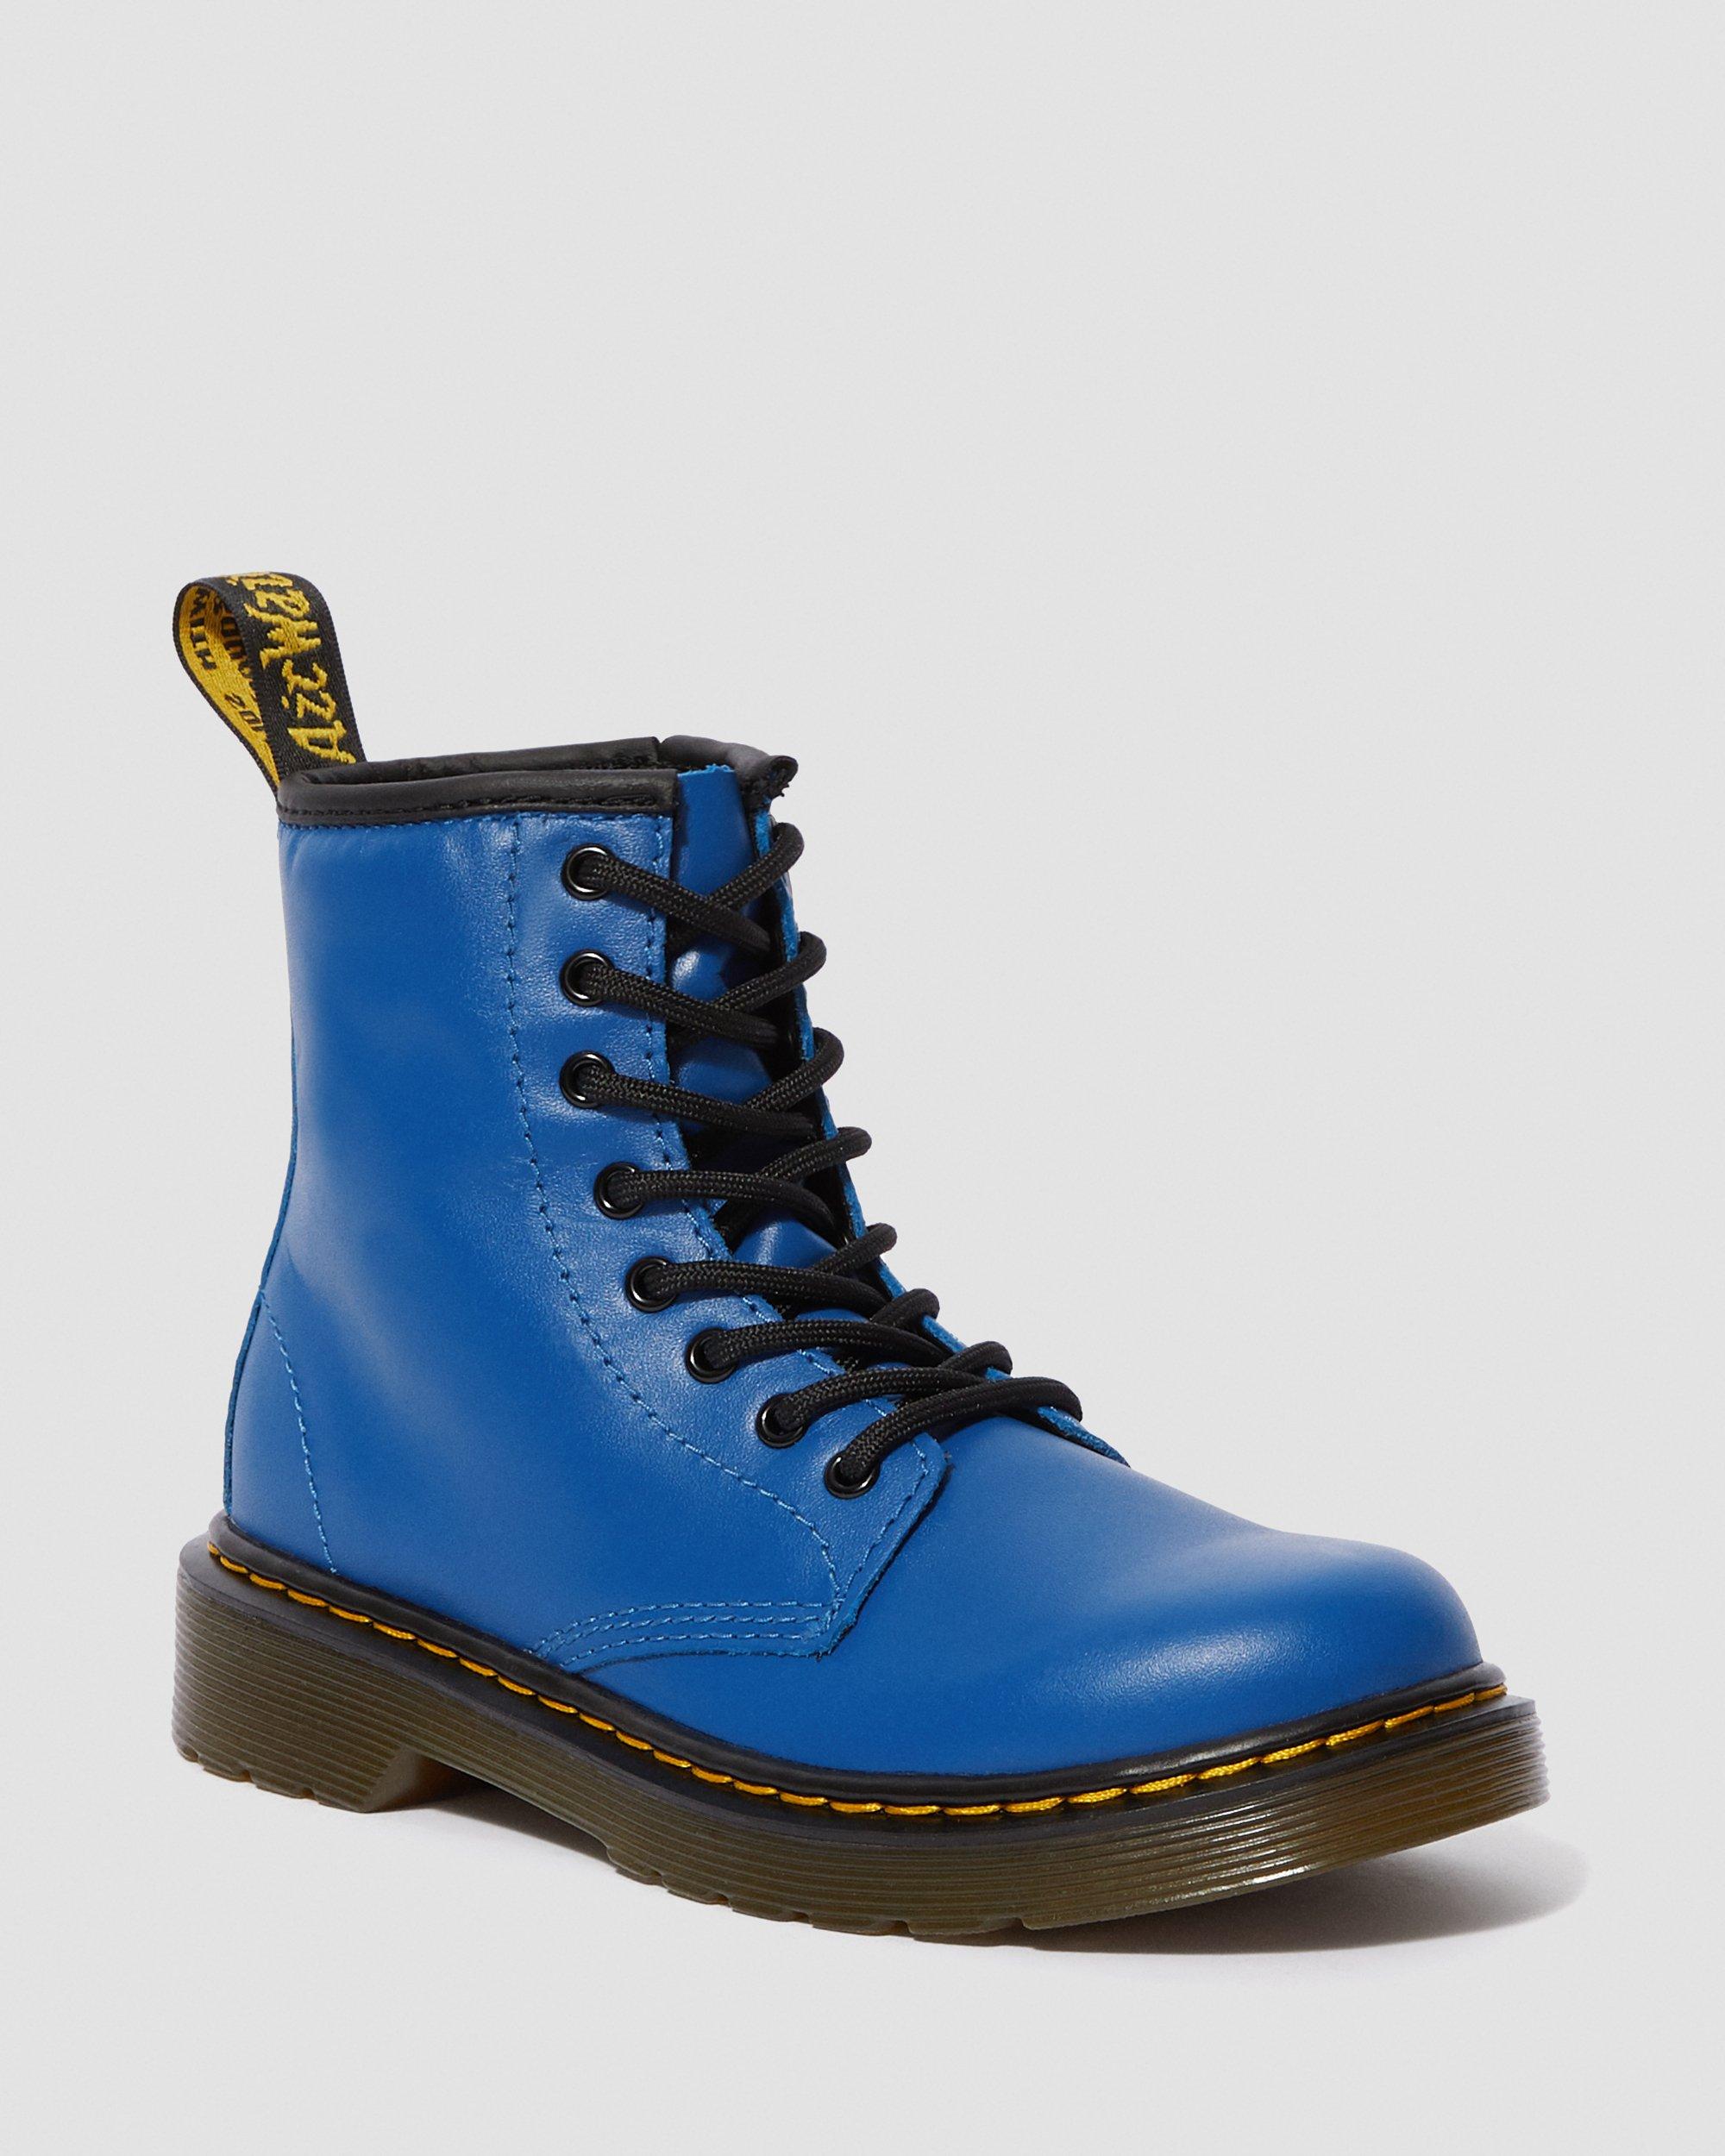 JUNIOR 1460 LEATHER ANKLE BOOTS | Dr. Martens